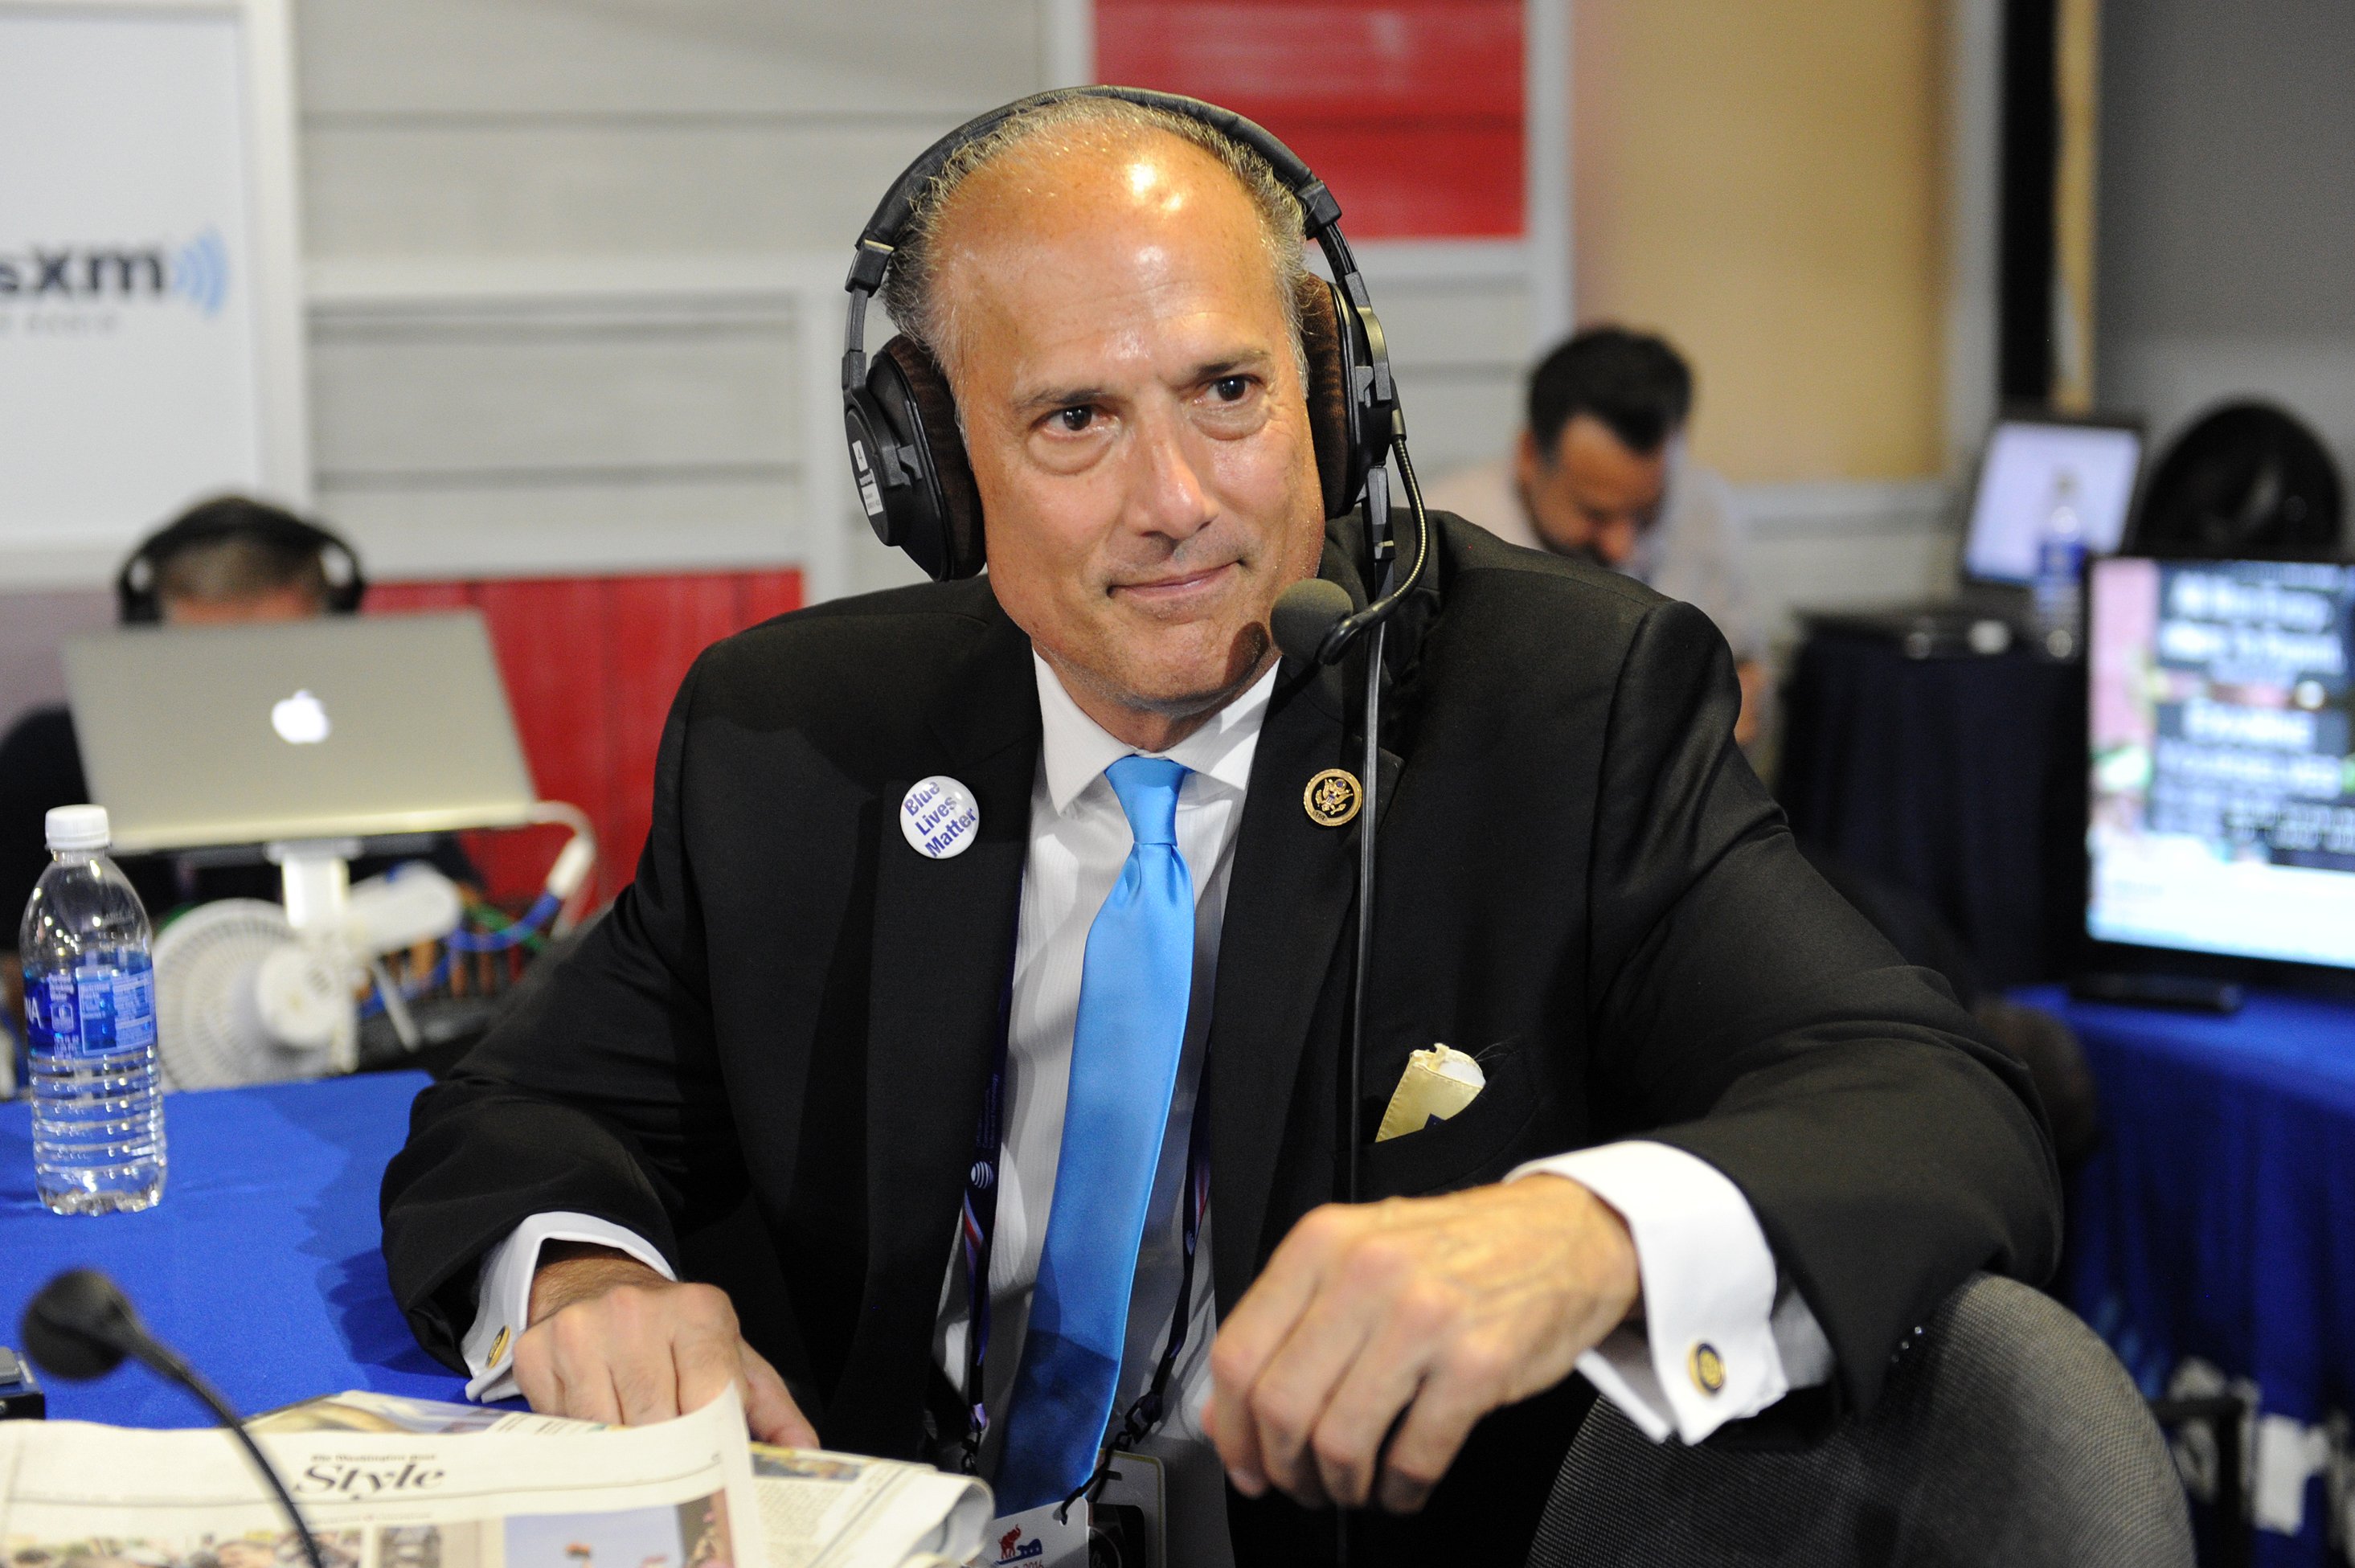 Tom Marino, Congressman of Pennsylvania, talks with Andrew Wilkow during an episode of The Wilkow Majority on SiriusXM Patriot at Quicken Loans Arena on July 21, 2016 in Cleveland, Ohio. (Photo by Ben Jackson/Getty Images for SiriusXM)